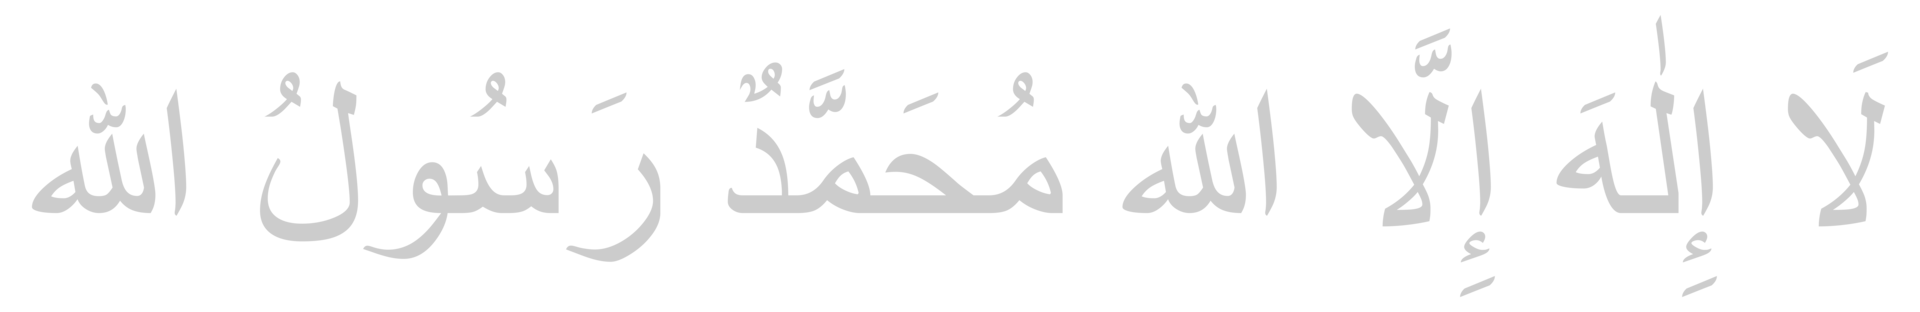 Syahadat, the Shahada, also transliterated as Shahadah, is an Islamic oath and creed, and one of the Five Pillars of Islam and part of the Adhan. Format PNG